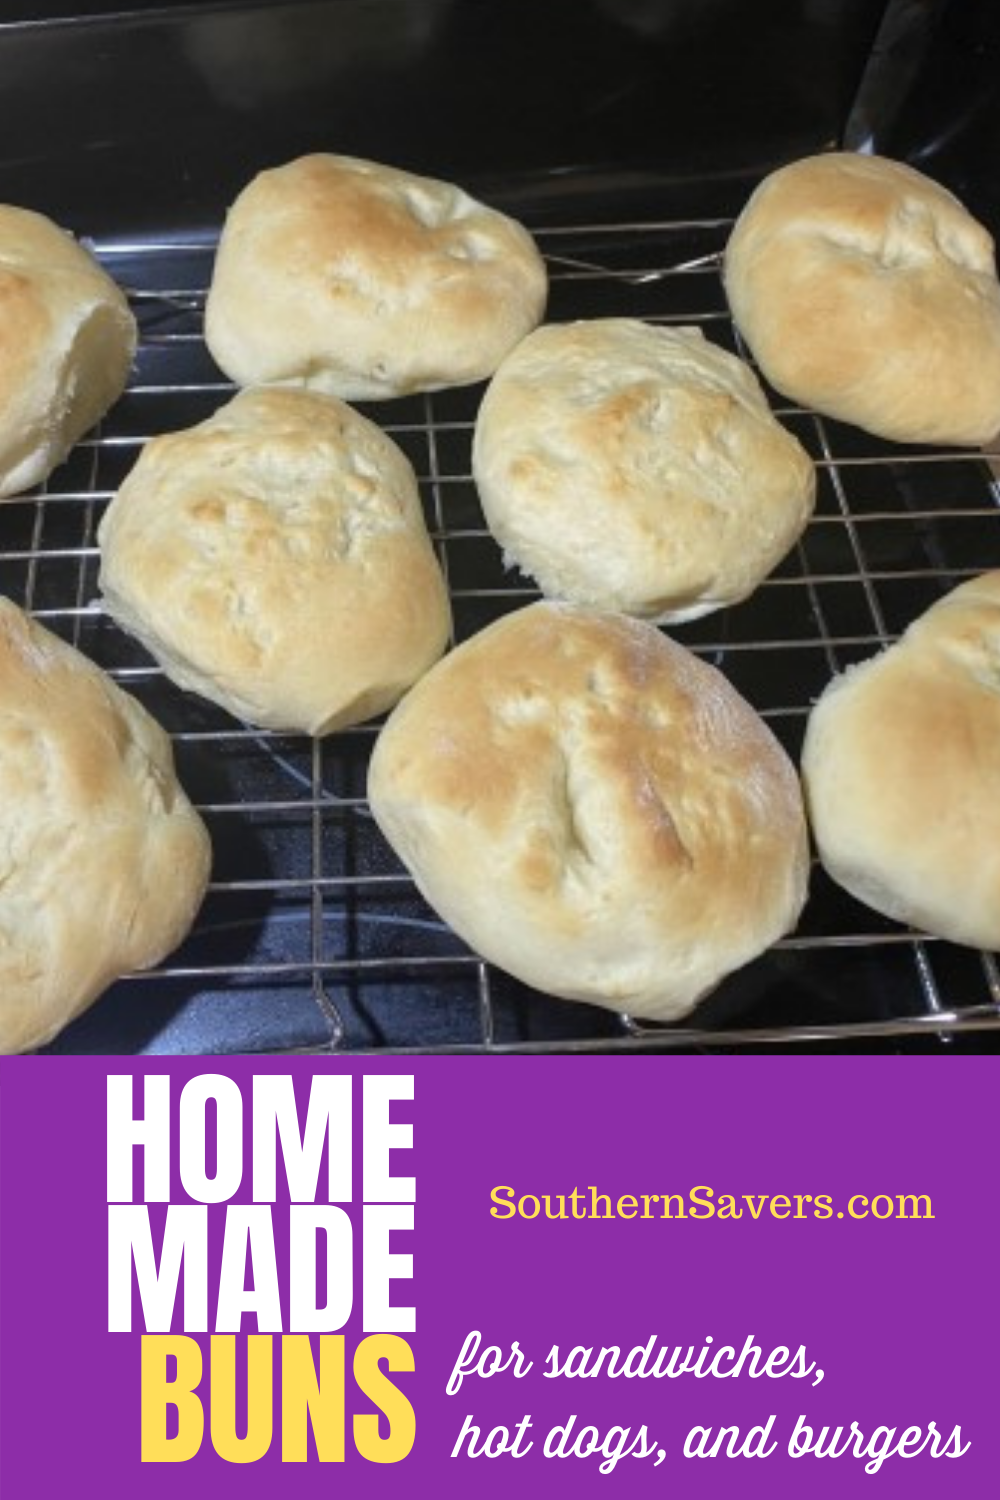 These homemade buns are better than anything you can get in the store, and they're easier than you'd expect! You can also freeze them for later.